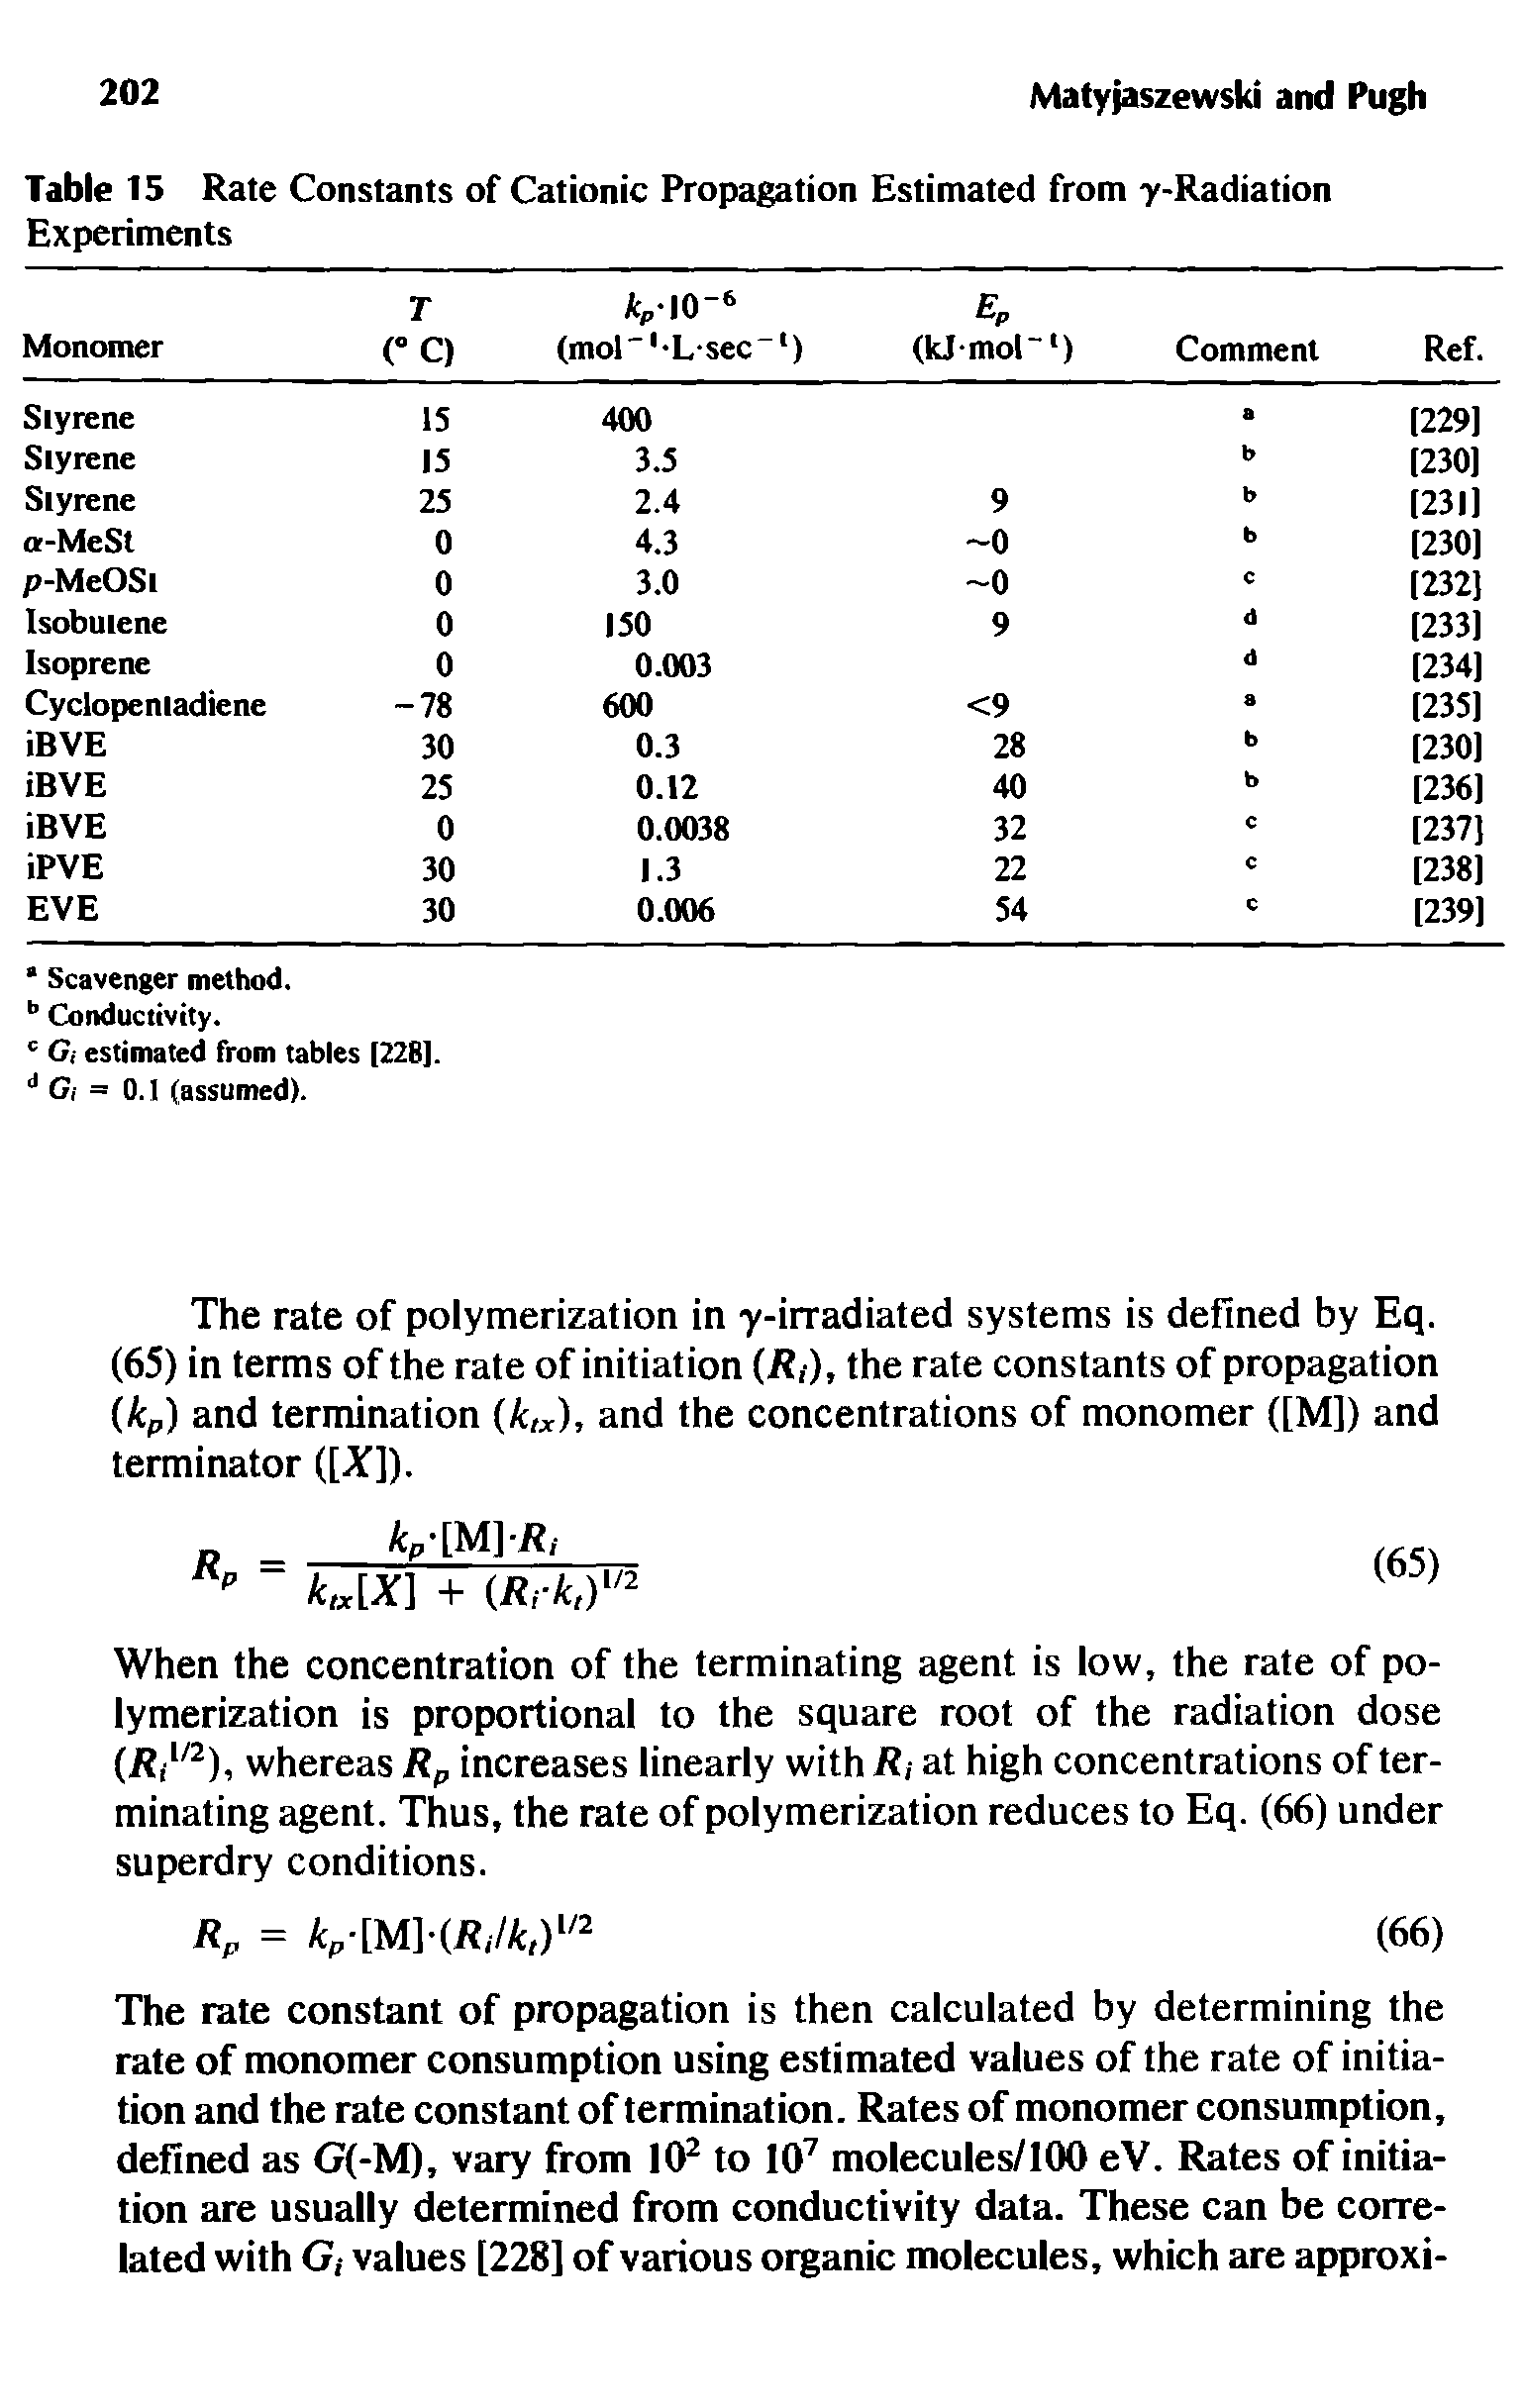 Table 15 Rate Constants of Cationic Propagation Estimated from y-Radiation Experiments...